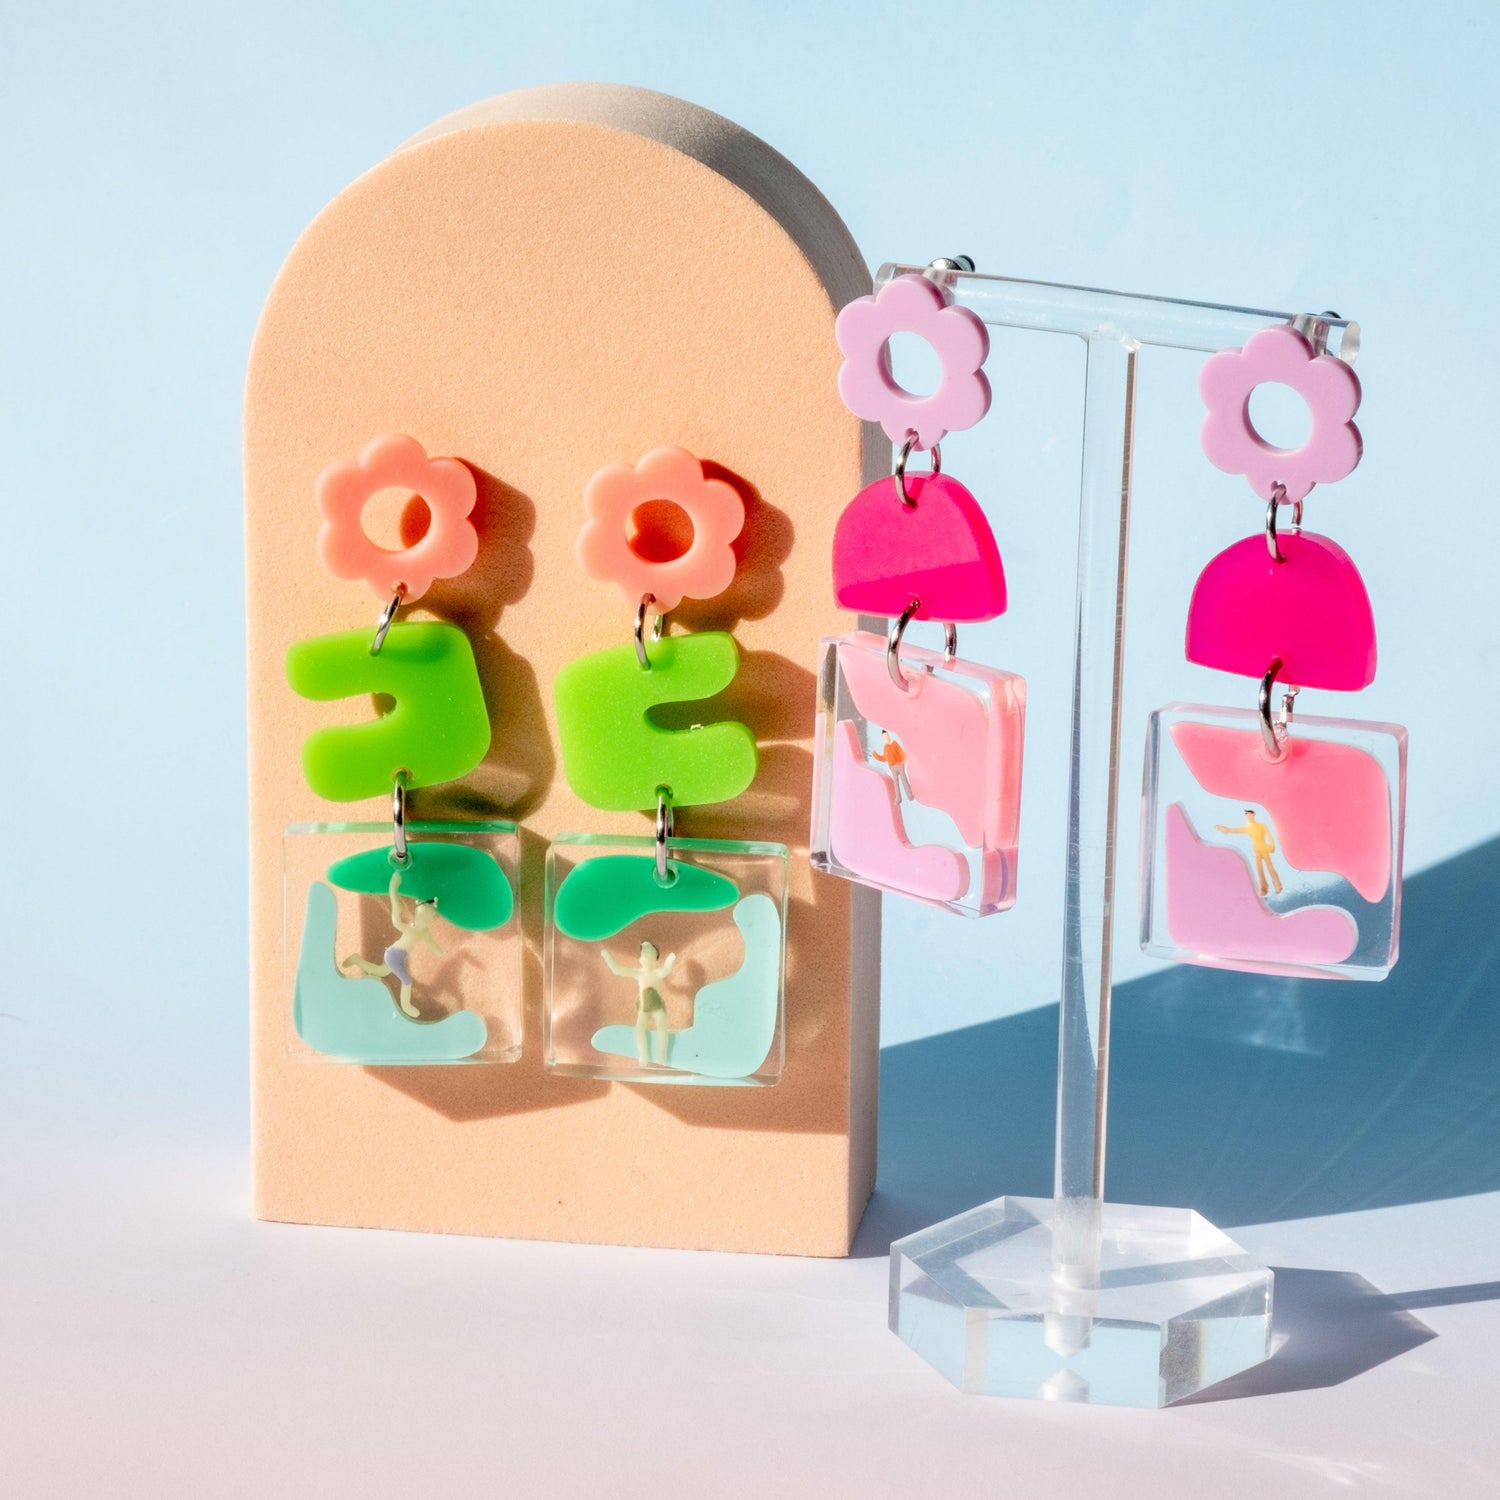 MOMENTS IN THE MIDDLE - FunkyFunYou-Creative Statement Earrings & DIY Kit